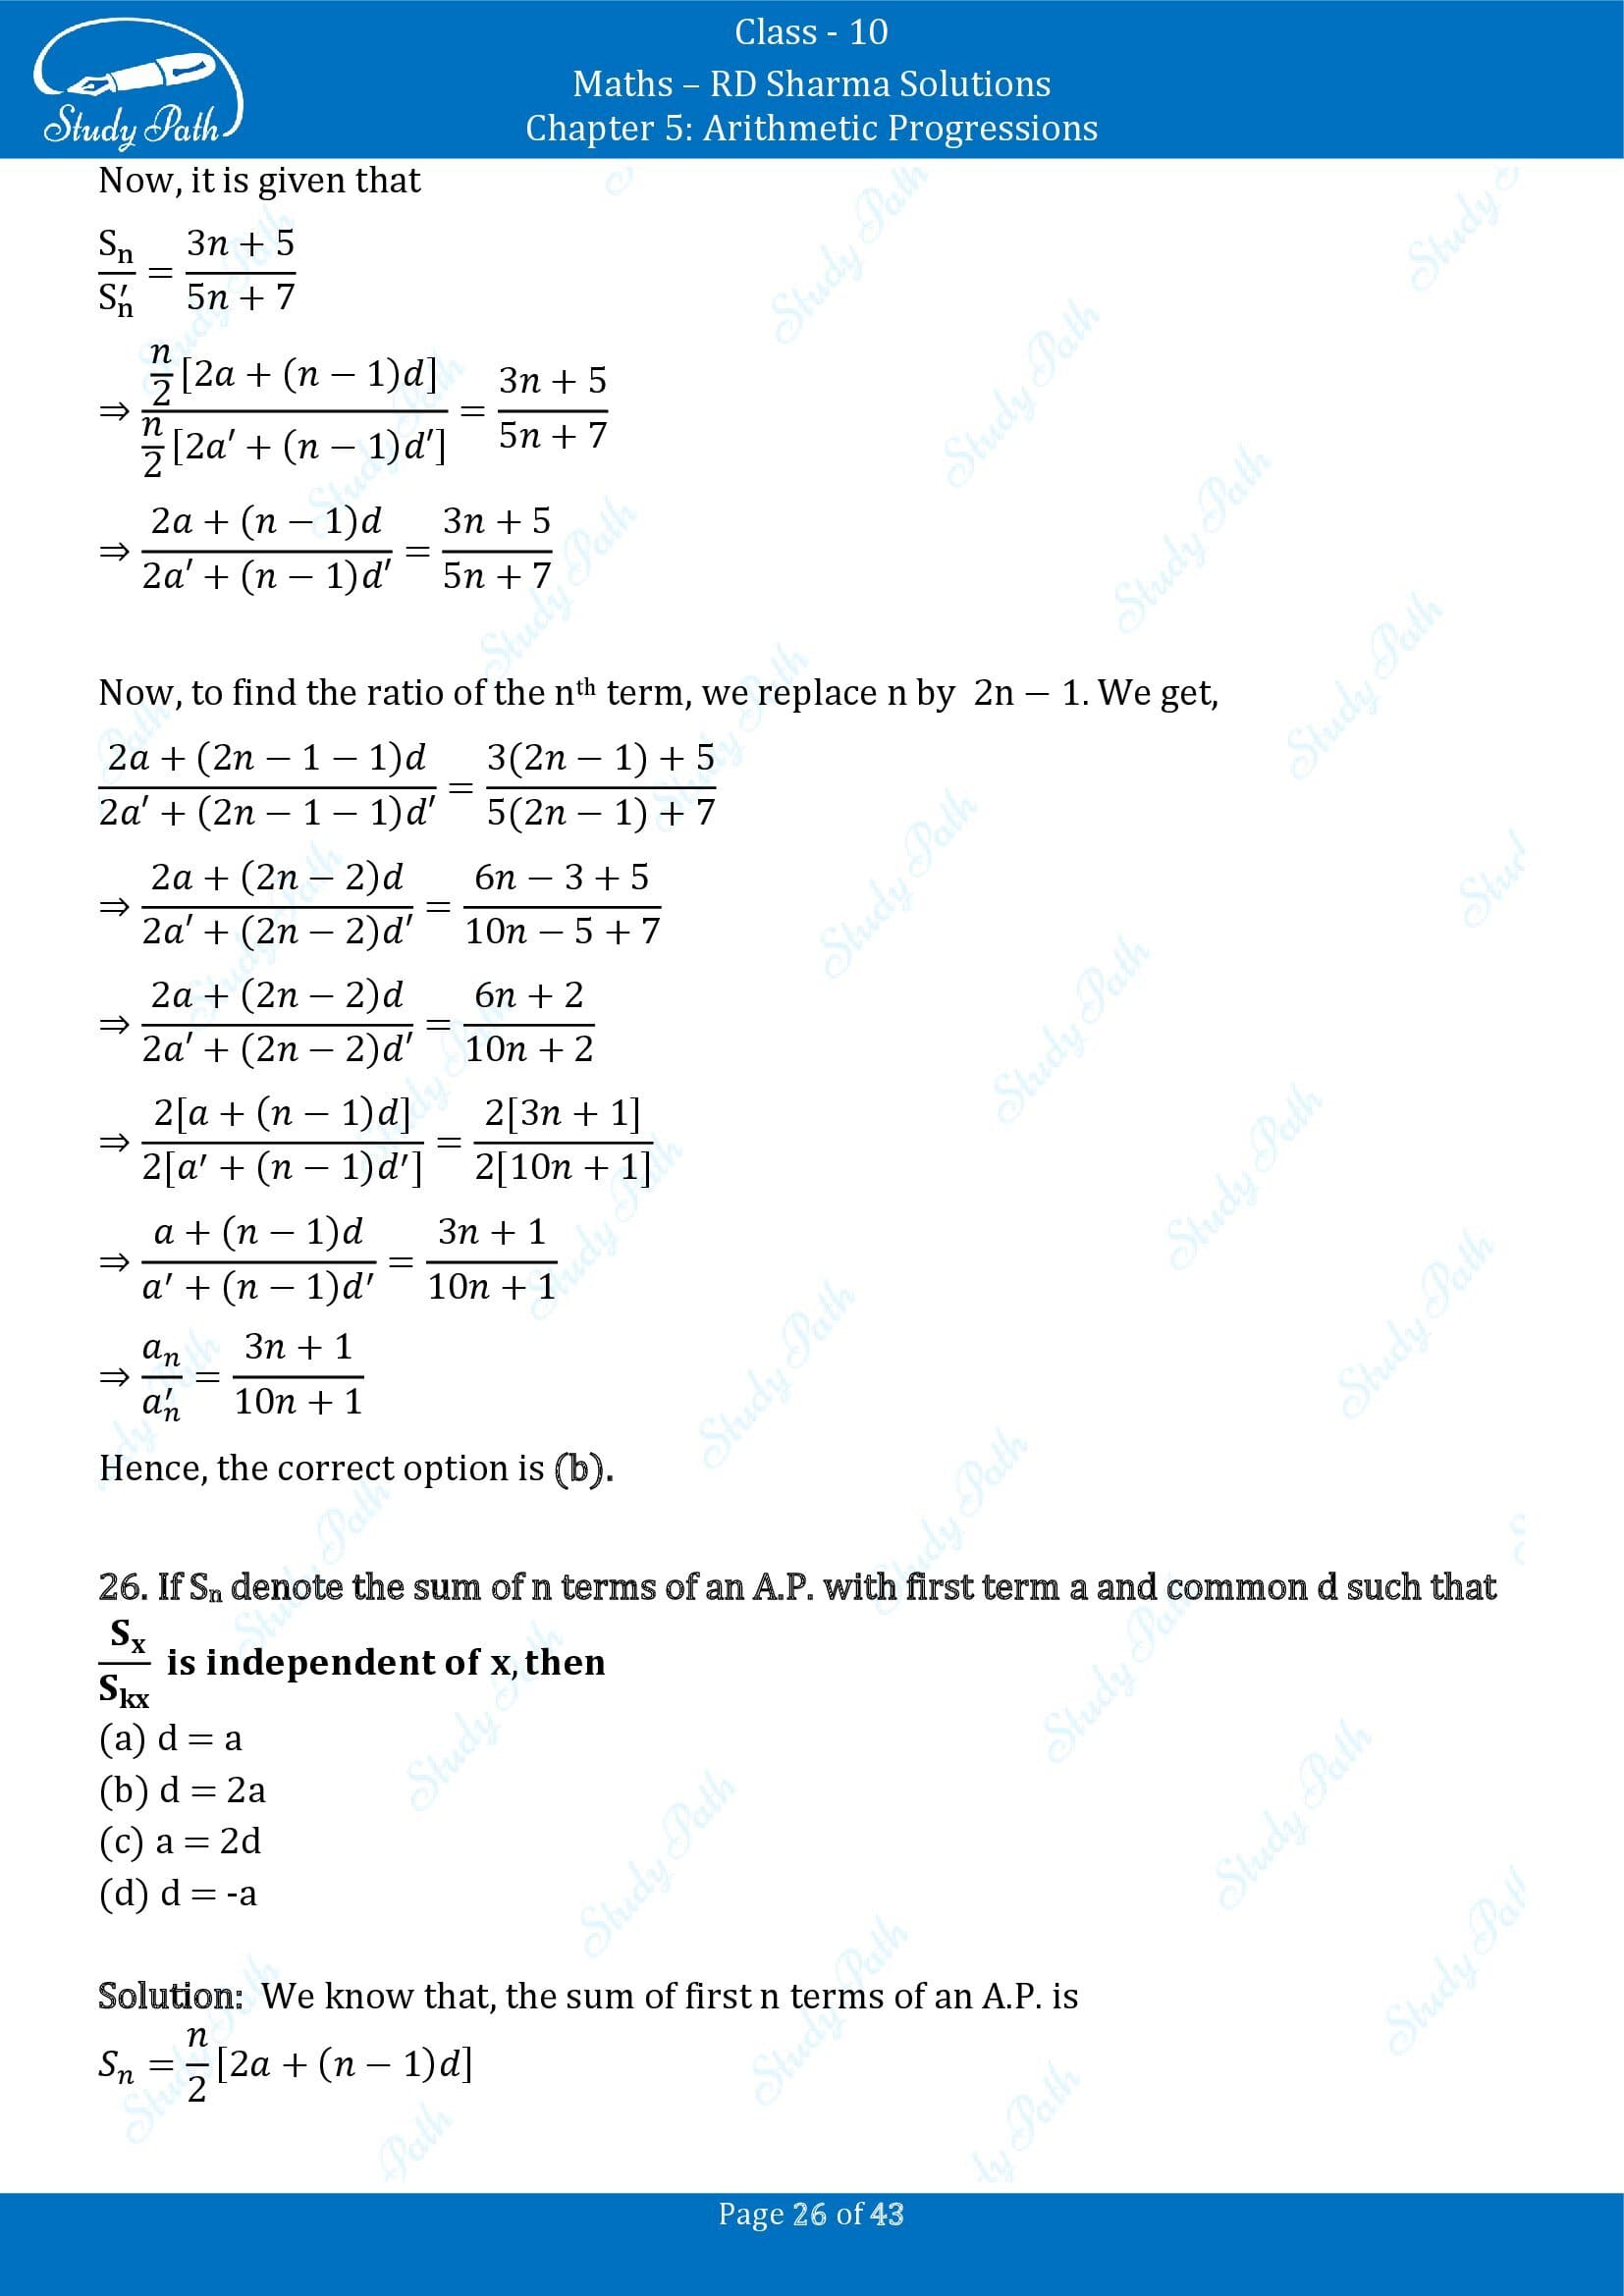 RD Sharma Solutions Class 10 Chapter 5 Arithmetic Progressions Multiple Choice Question MCQs 00026